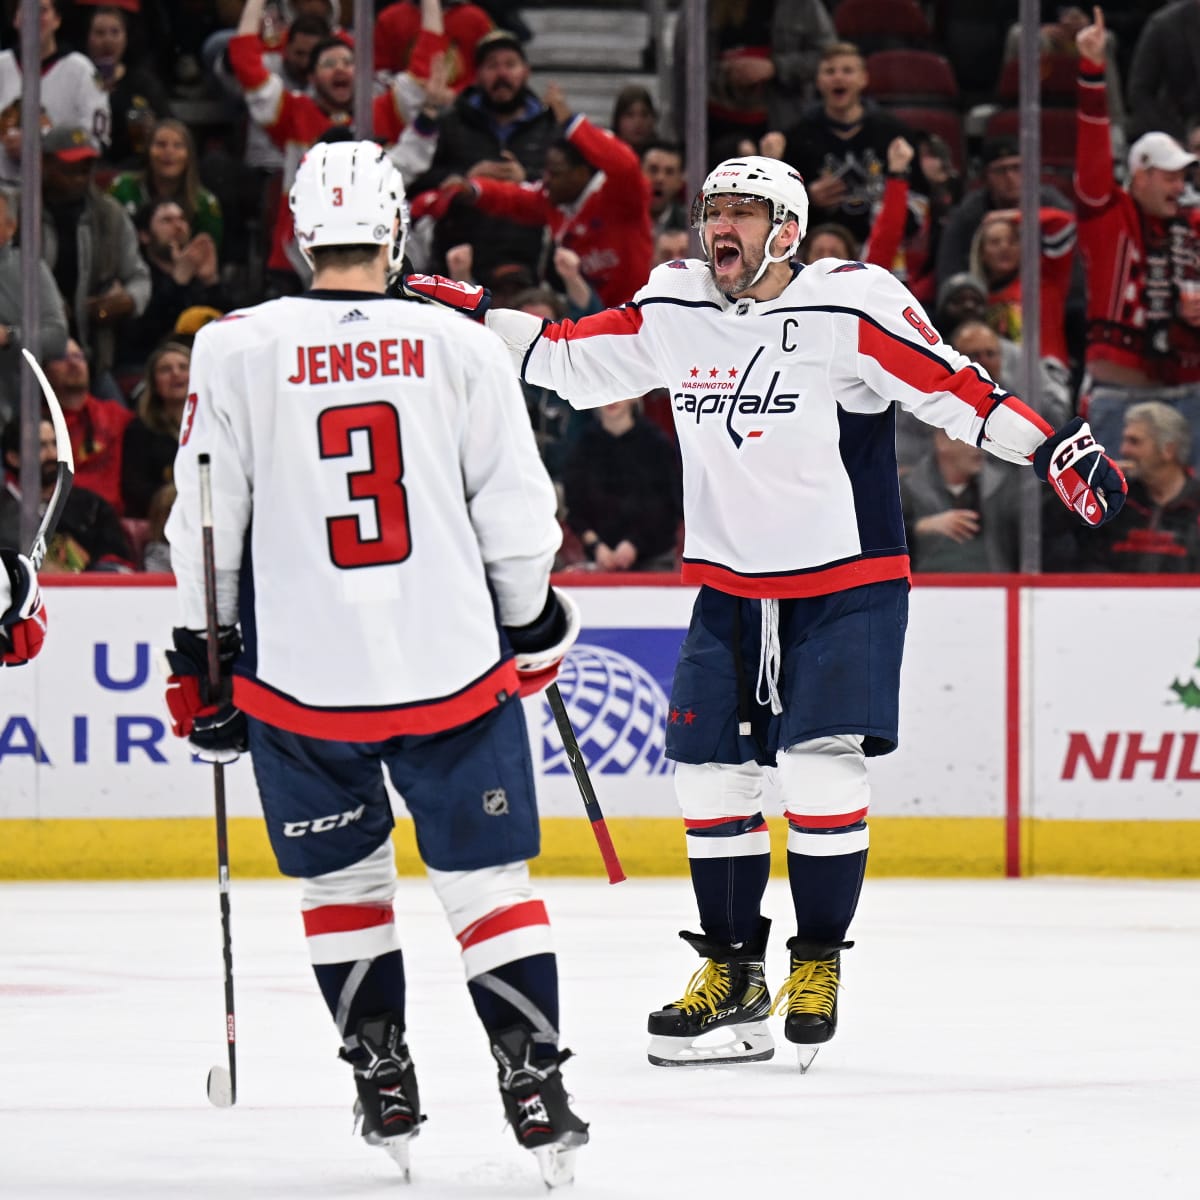 NBC Sports Hockey on X: @Capitals @ovi8 OCT. 5th, 2005: Alex Ovechkin  makes his NHL debut scoring the first two goals of his career. Now, in his  15th season, he sits two